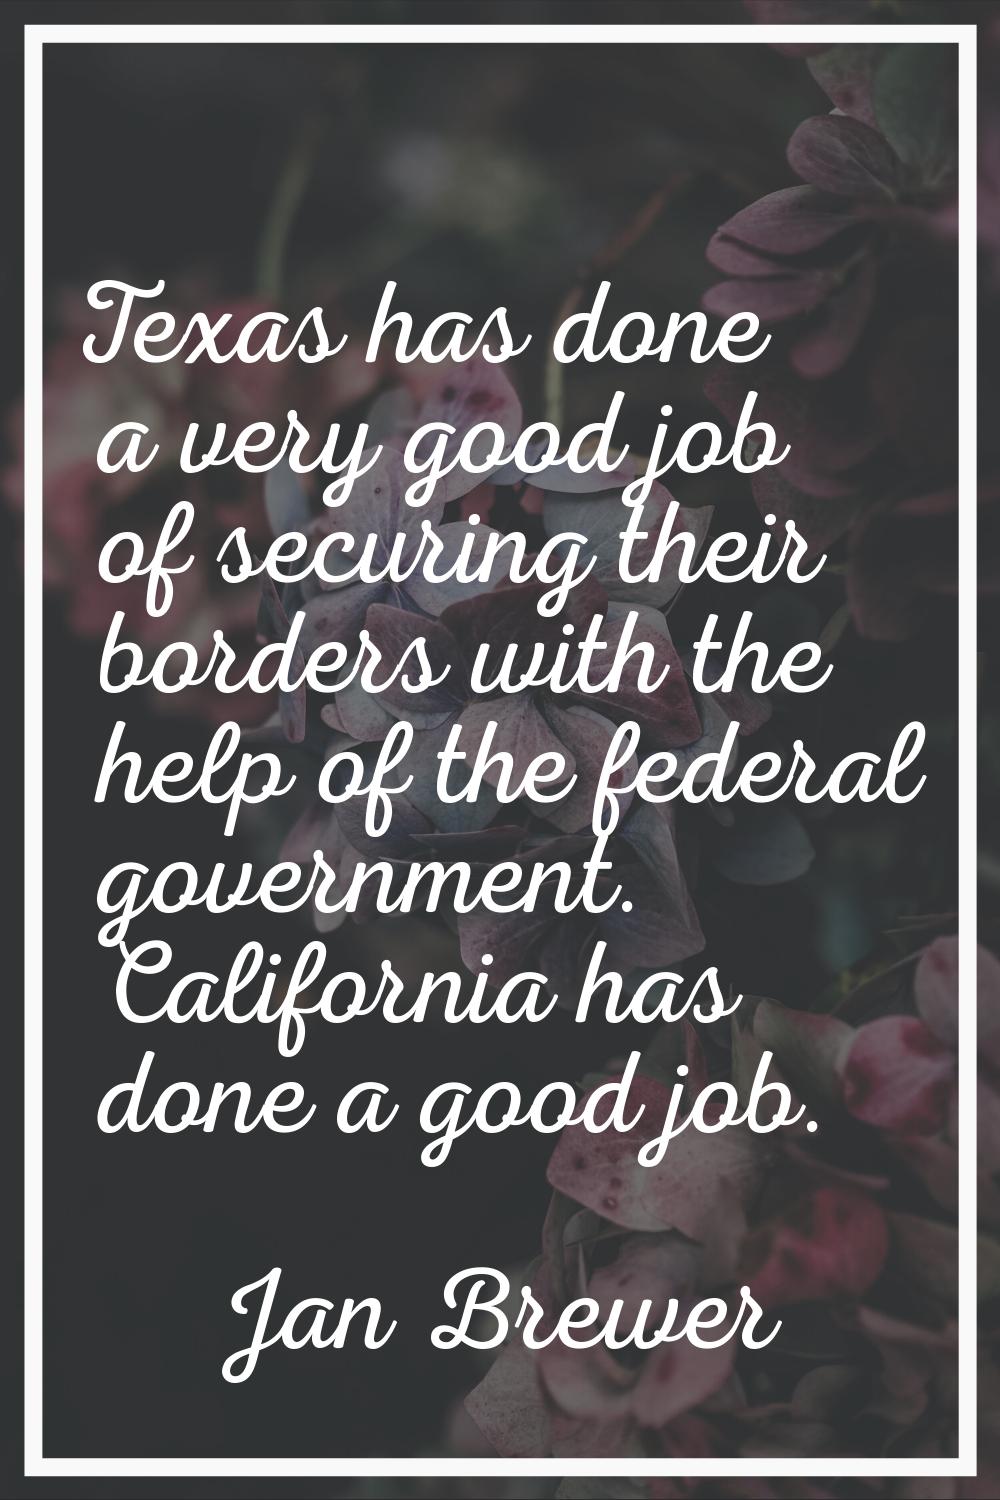 Texas has done a very good job of securing their borders with the help of the federal government. C